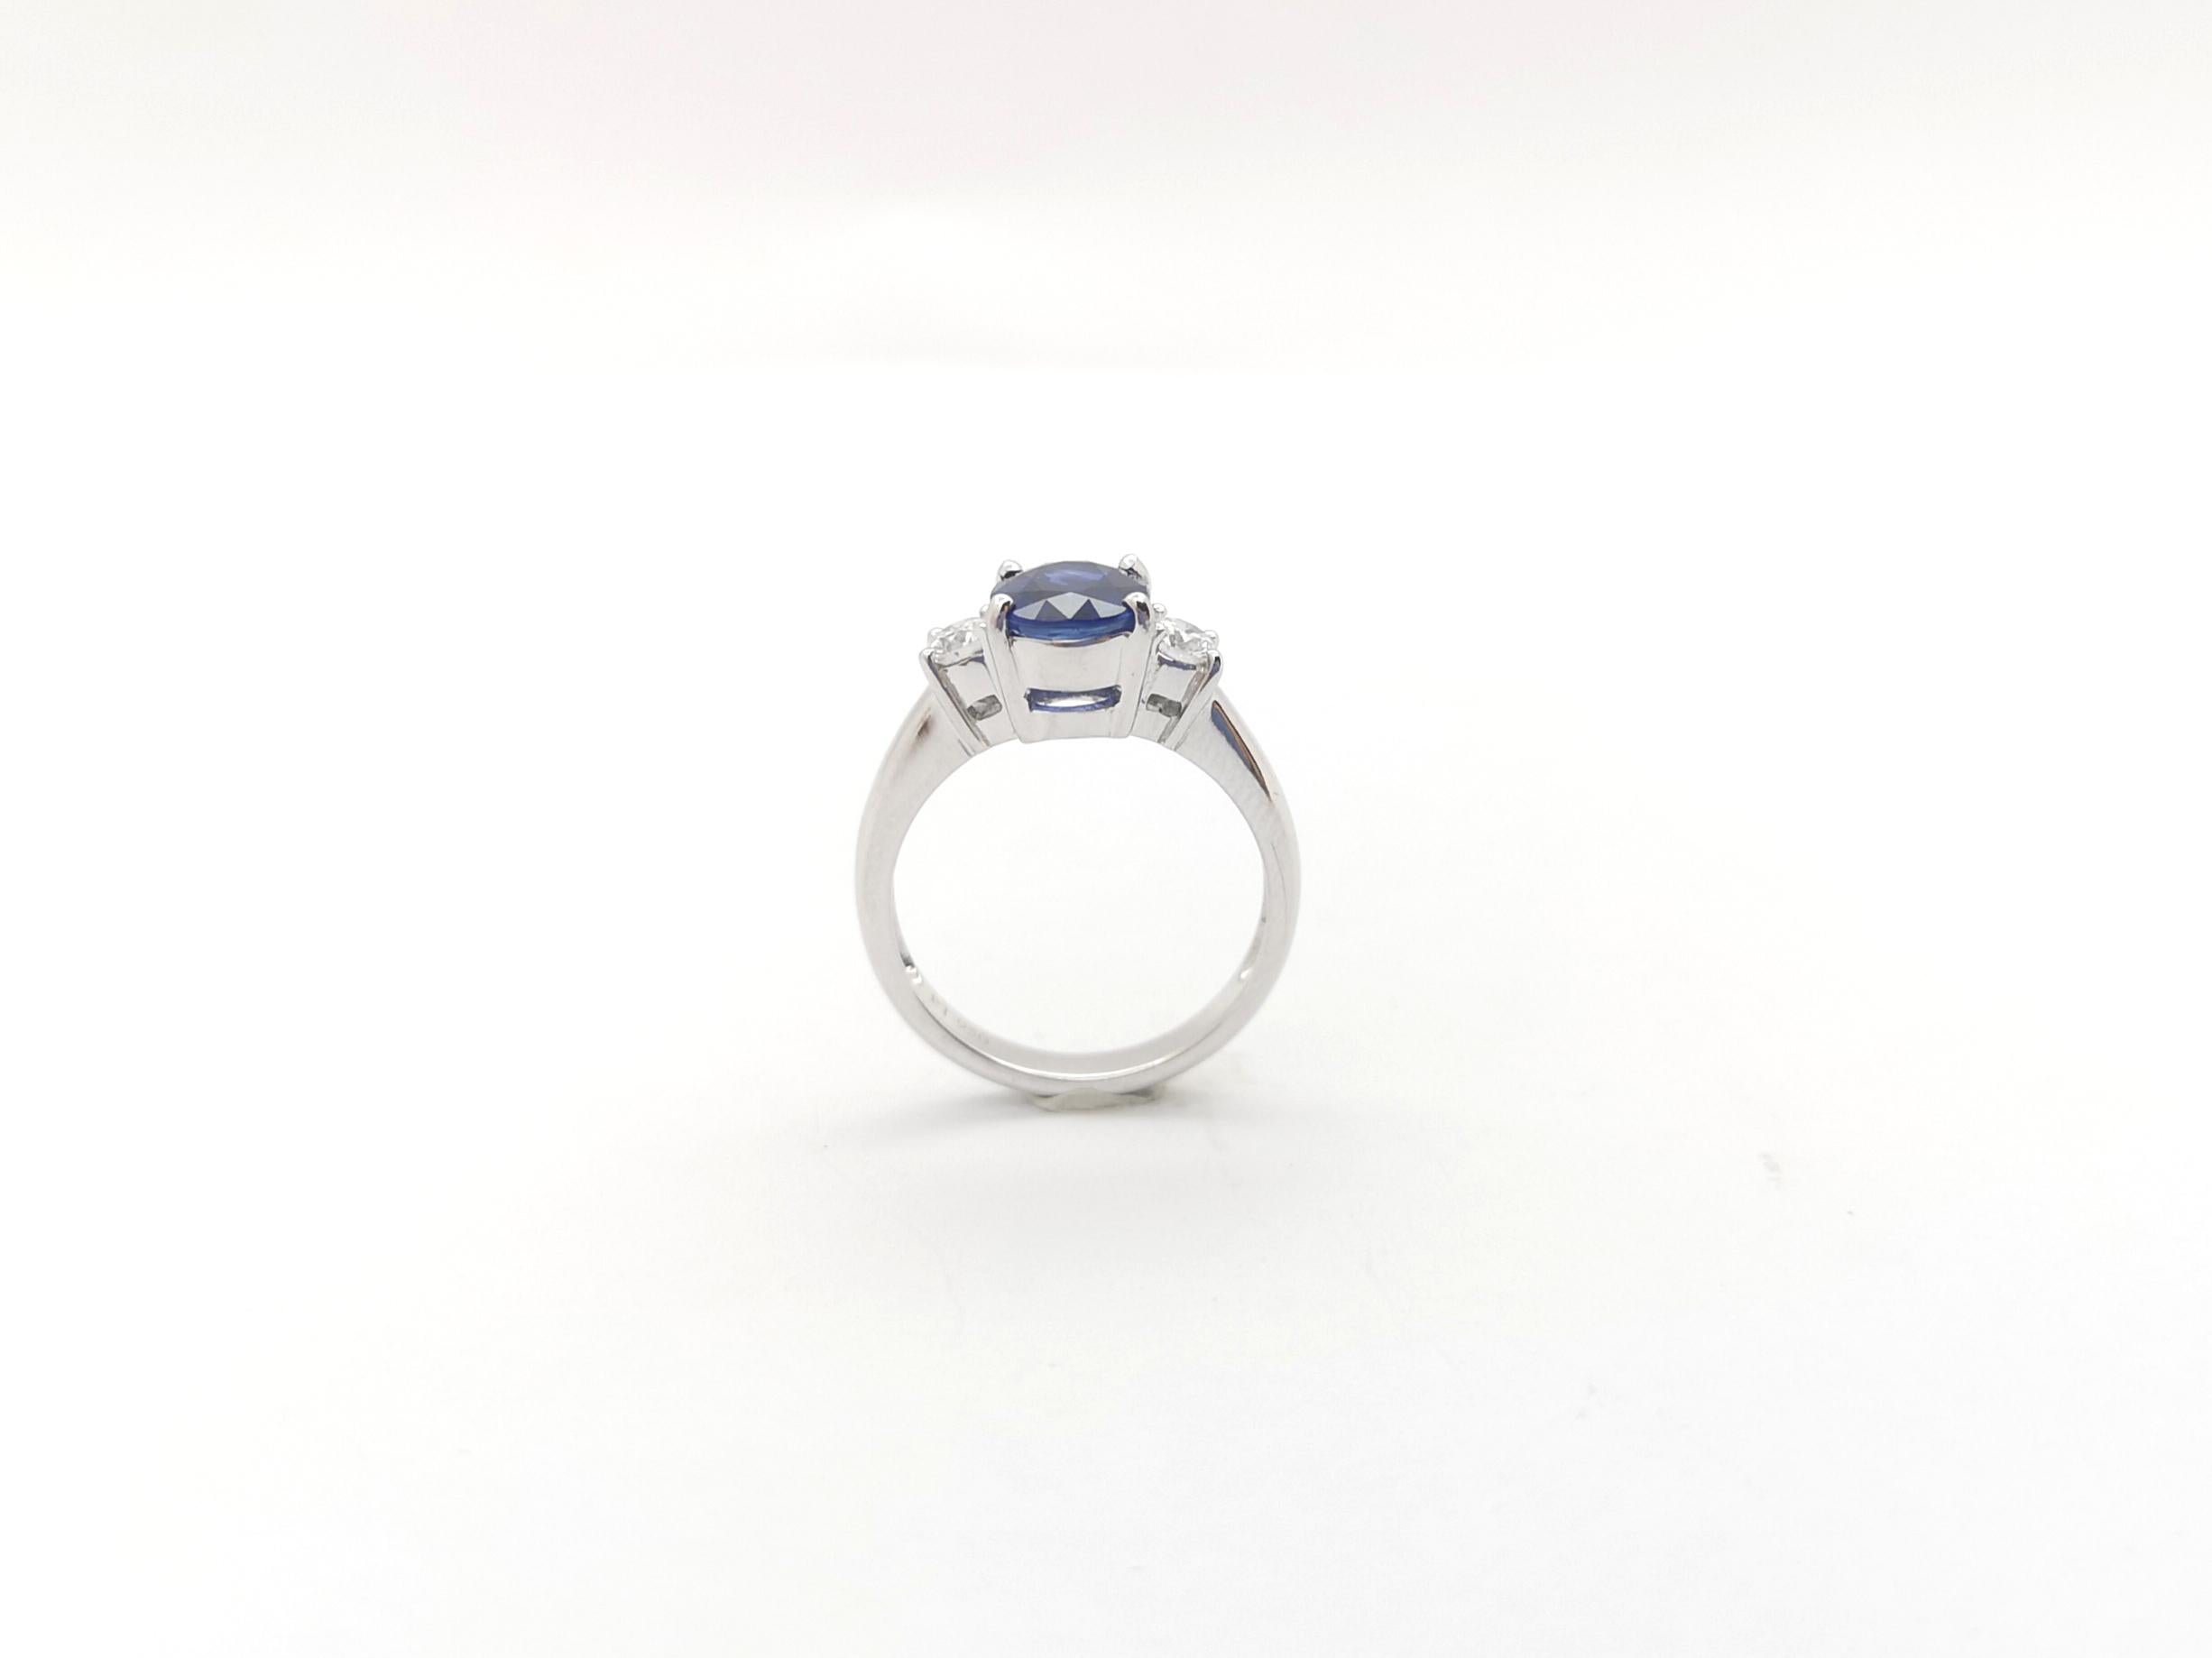 GIA Certified 2.50 cts Blue Sapphire with Diamond Ring set in Platinum 950  For Sale 7